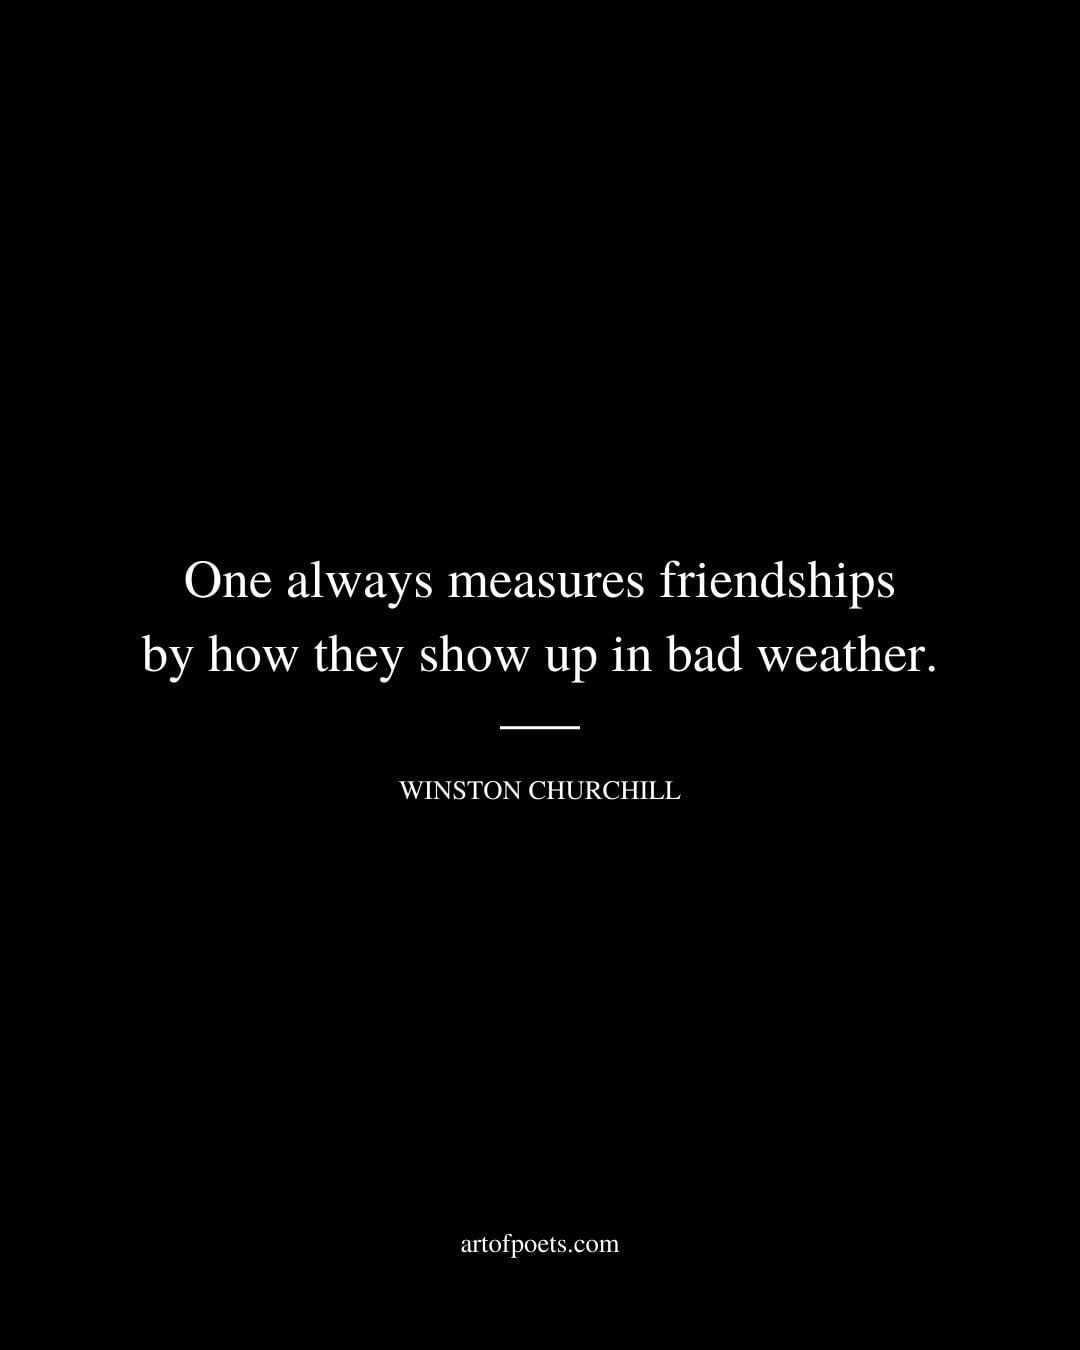 One always measures friendships by how they show up in bad weather